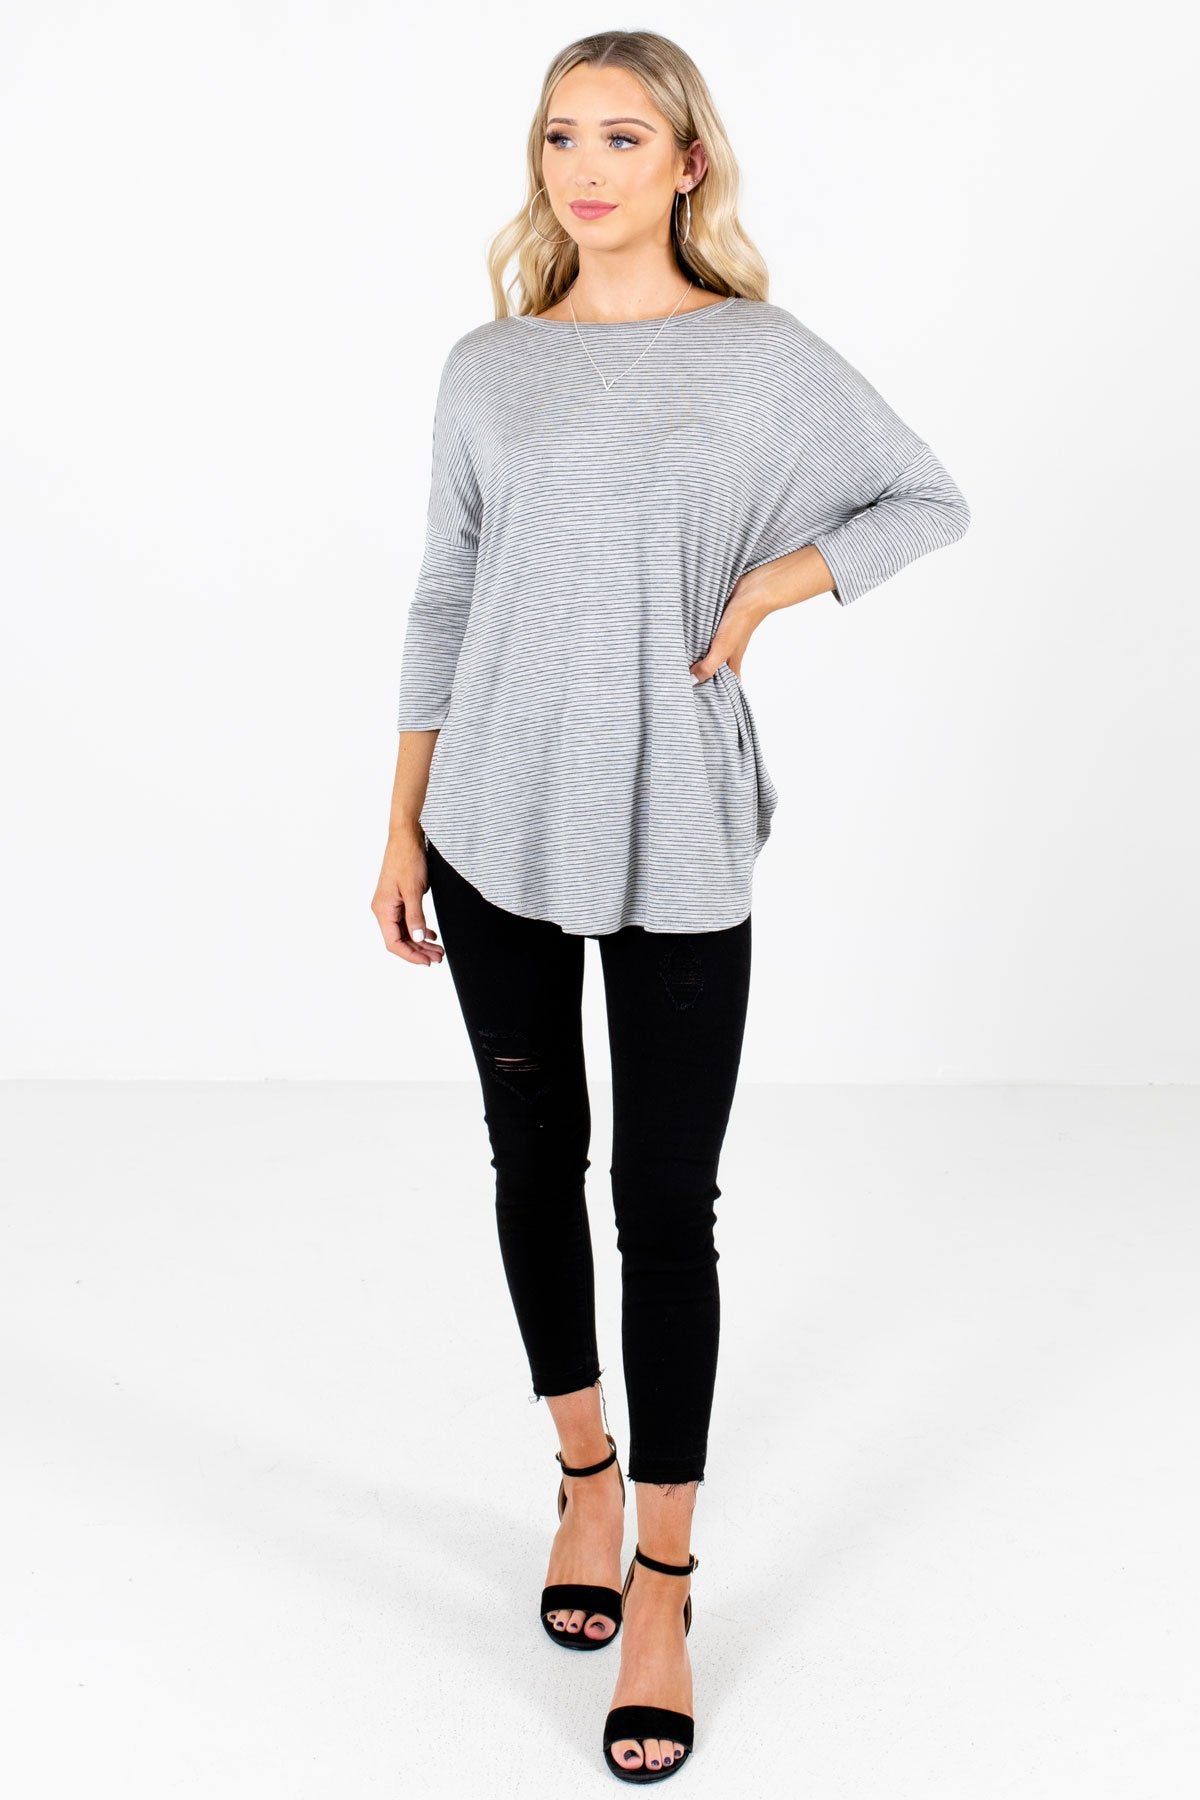 Gray Cute and Comfortable Boutique Tops for Women